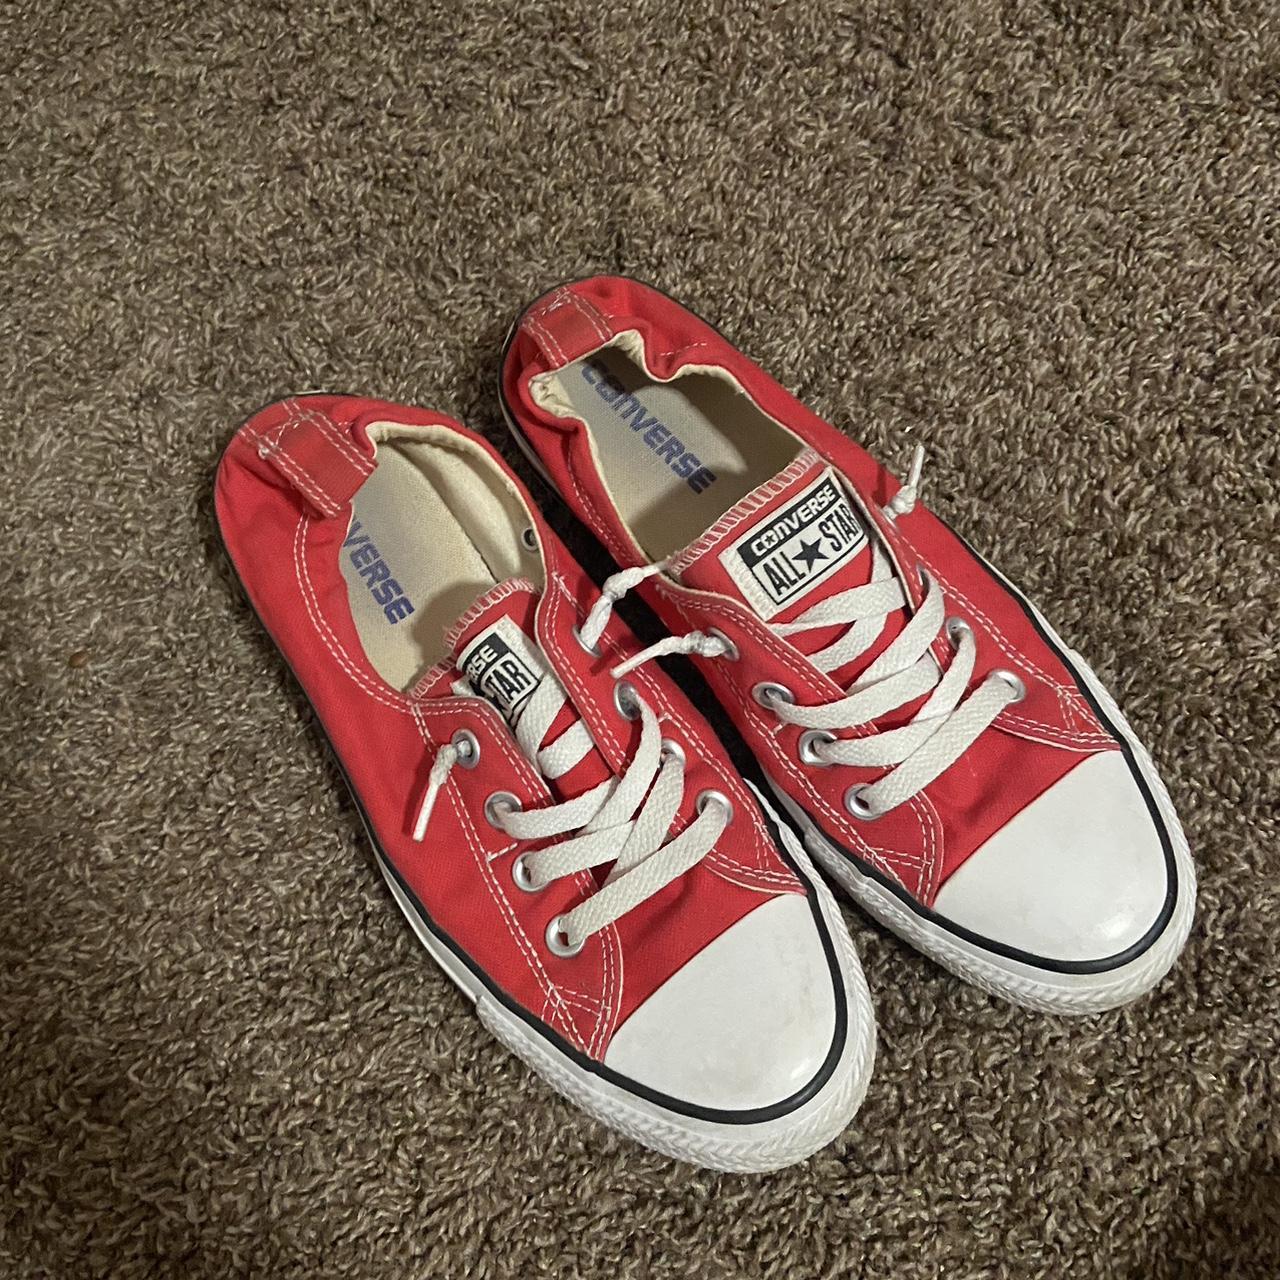 Red converse low top size 8 woman’s - Depop